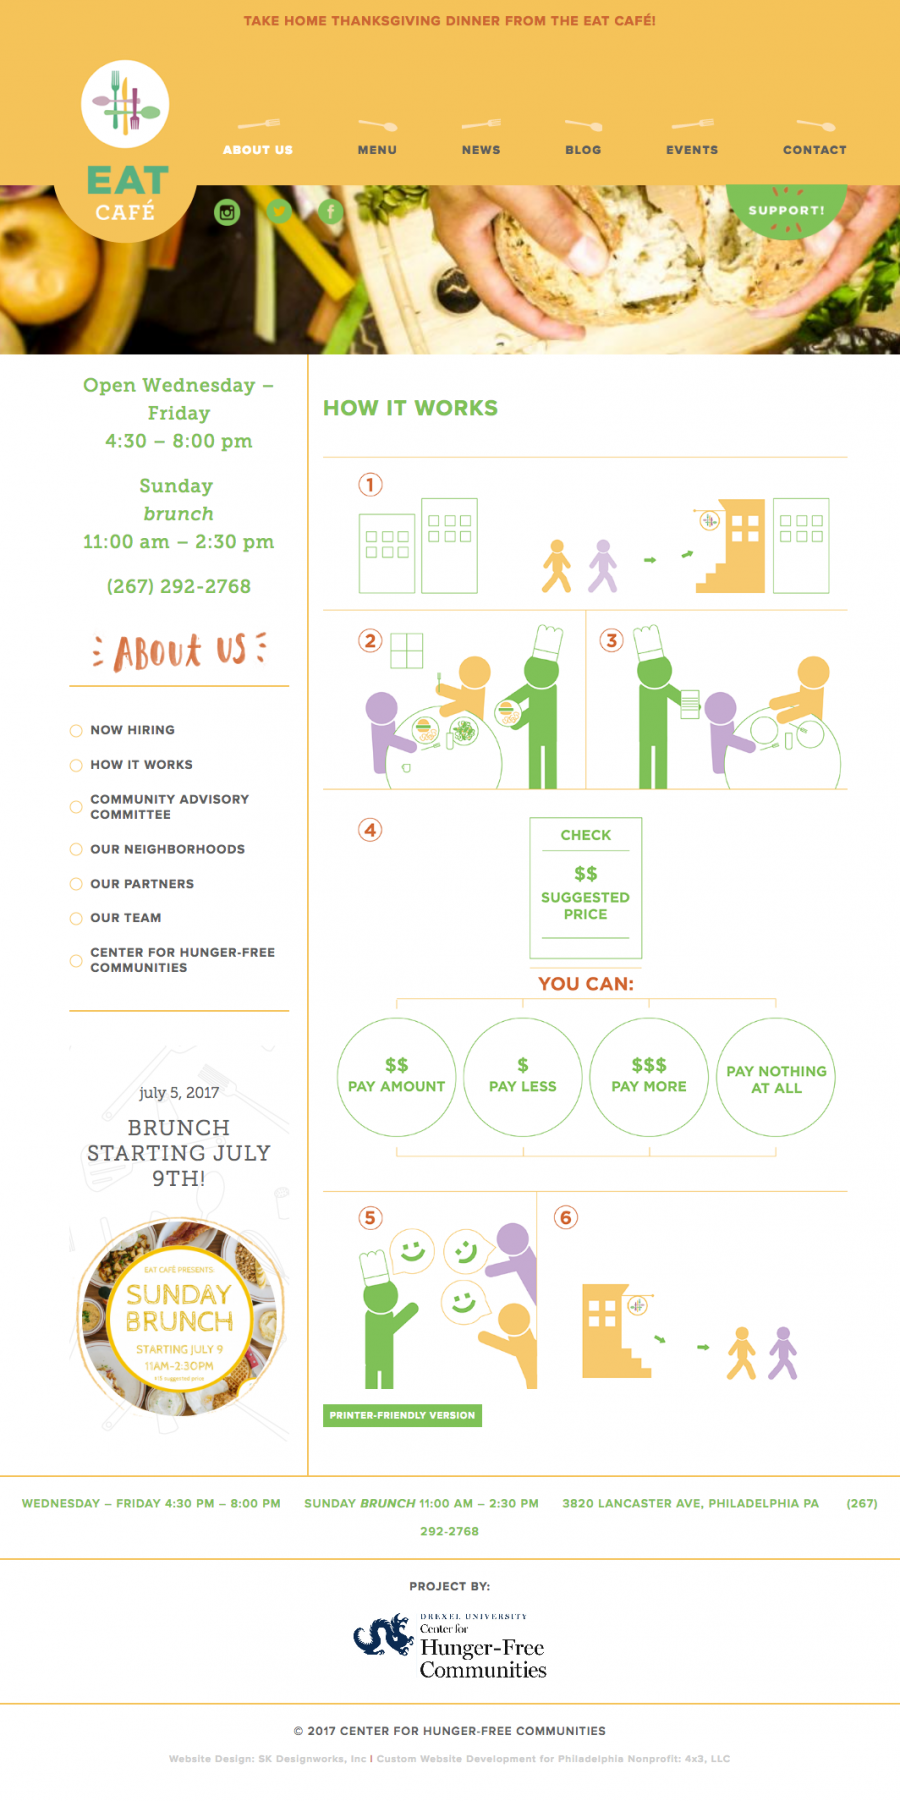 Educational Infographic about restaurant payment system